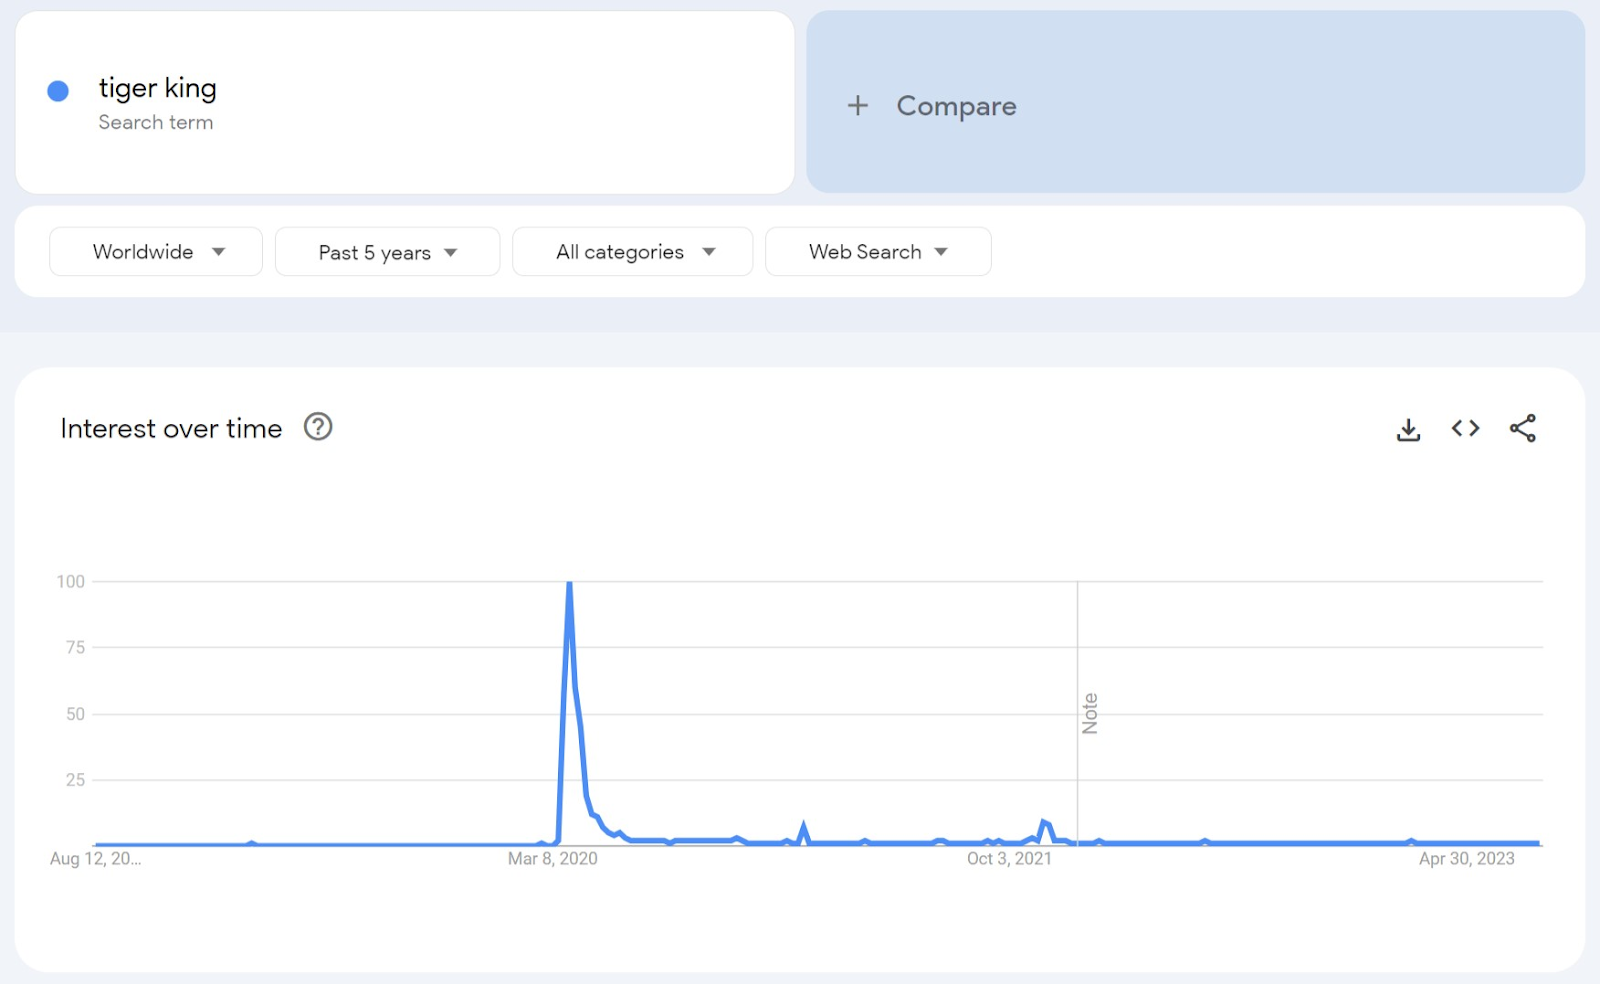 "Interest over time" graph for Tiger King in Google Trends